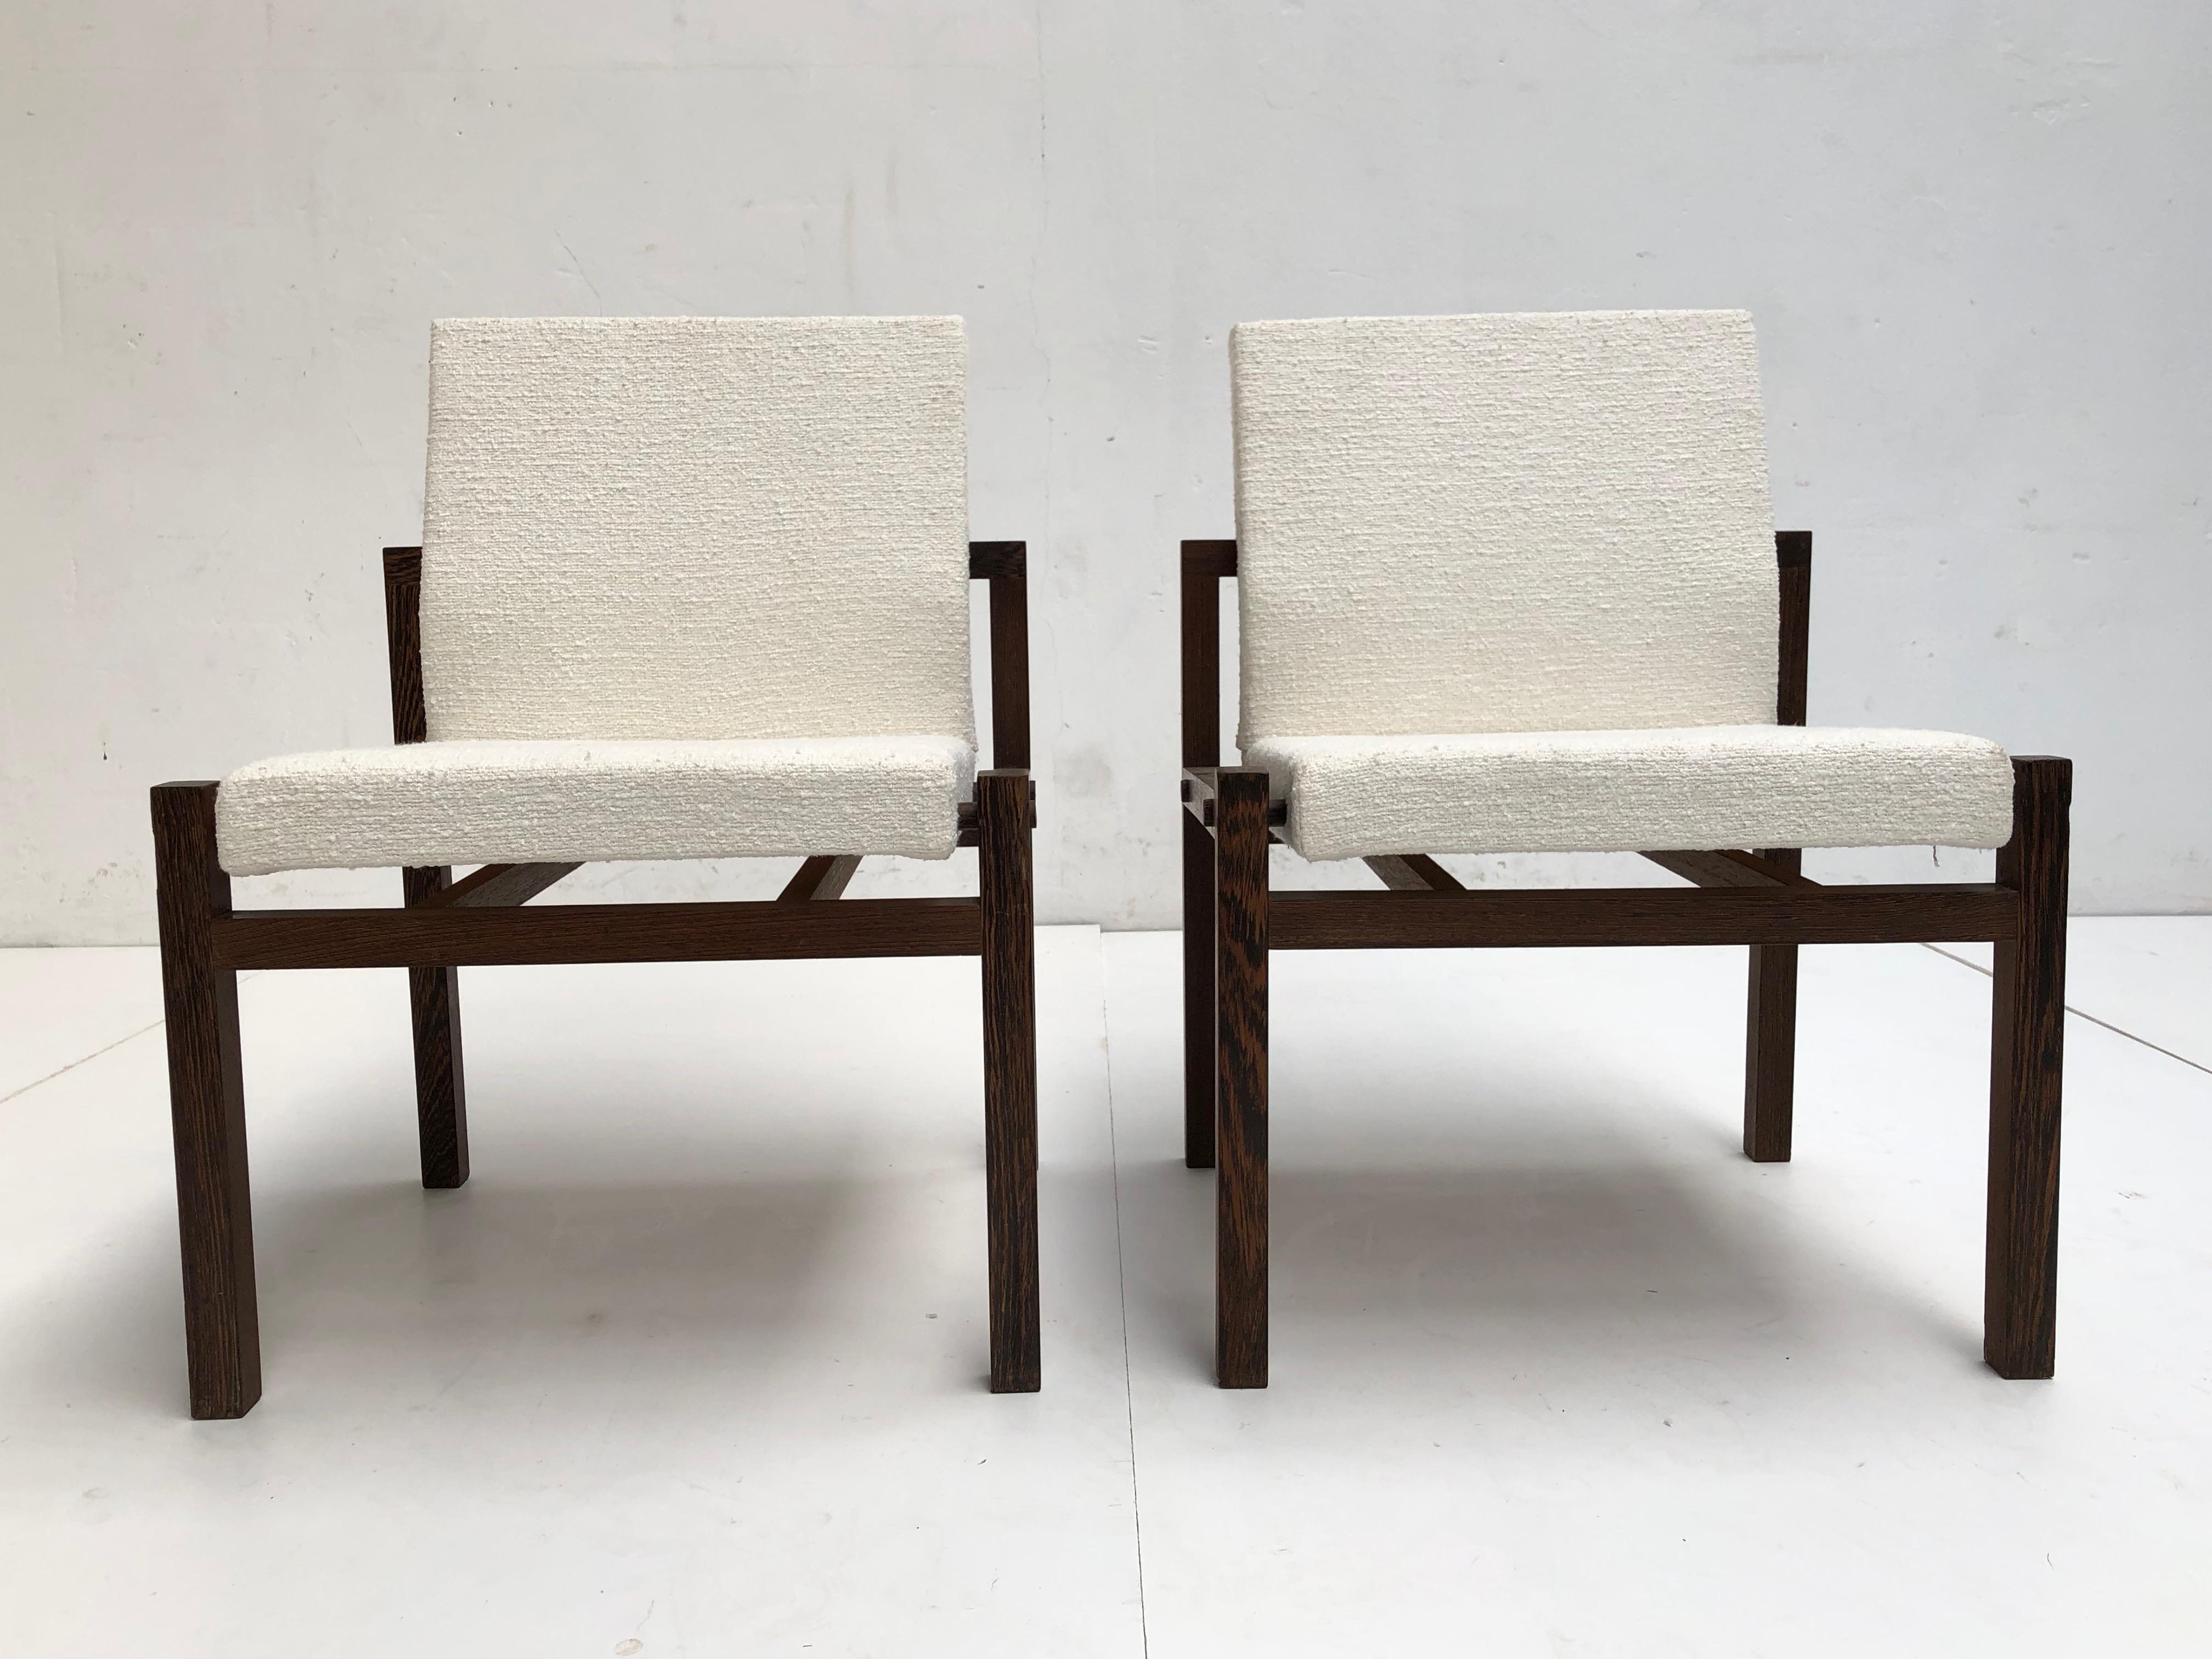 Very nice engineered and constructed pair of Dutch lounge chairs that are most likely a design by Martin Visser or Hein Stolle for 't Spectrum early 1960s.

The frames are made of solid Wenge wood and has dowel caps to hide the screws

We